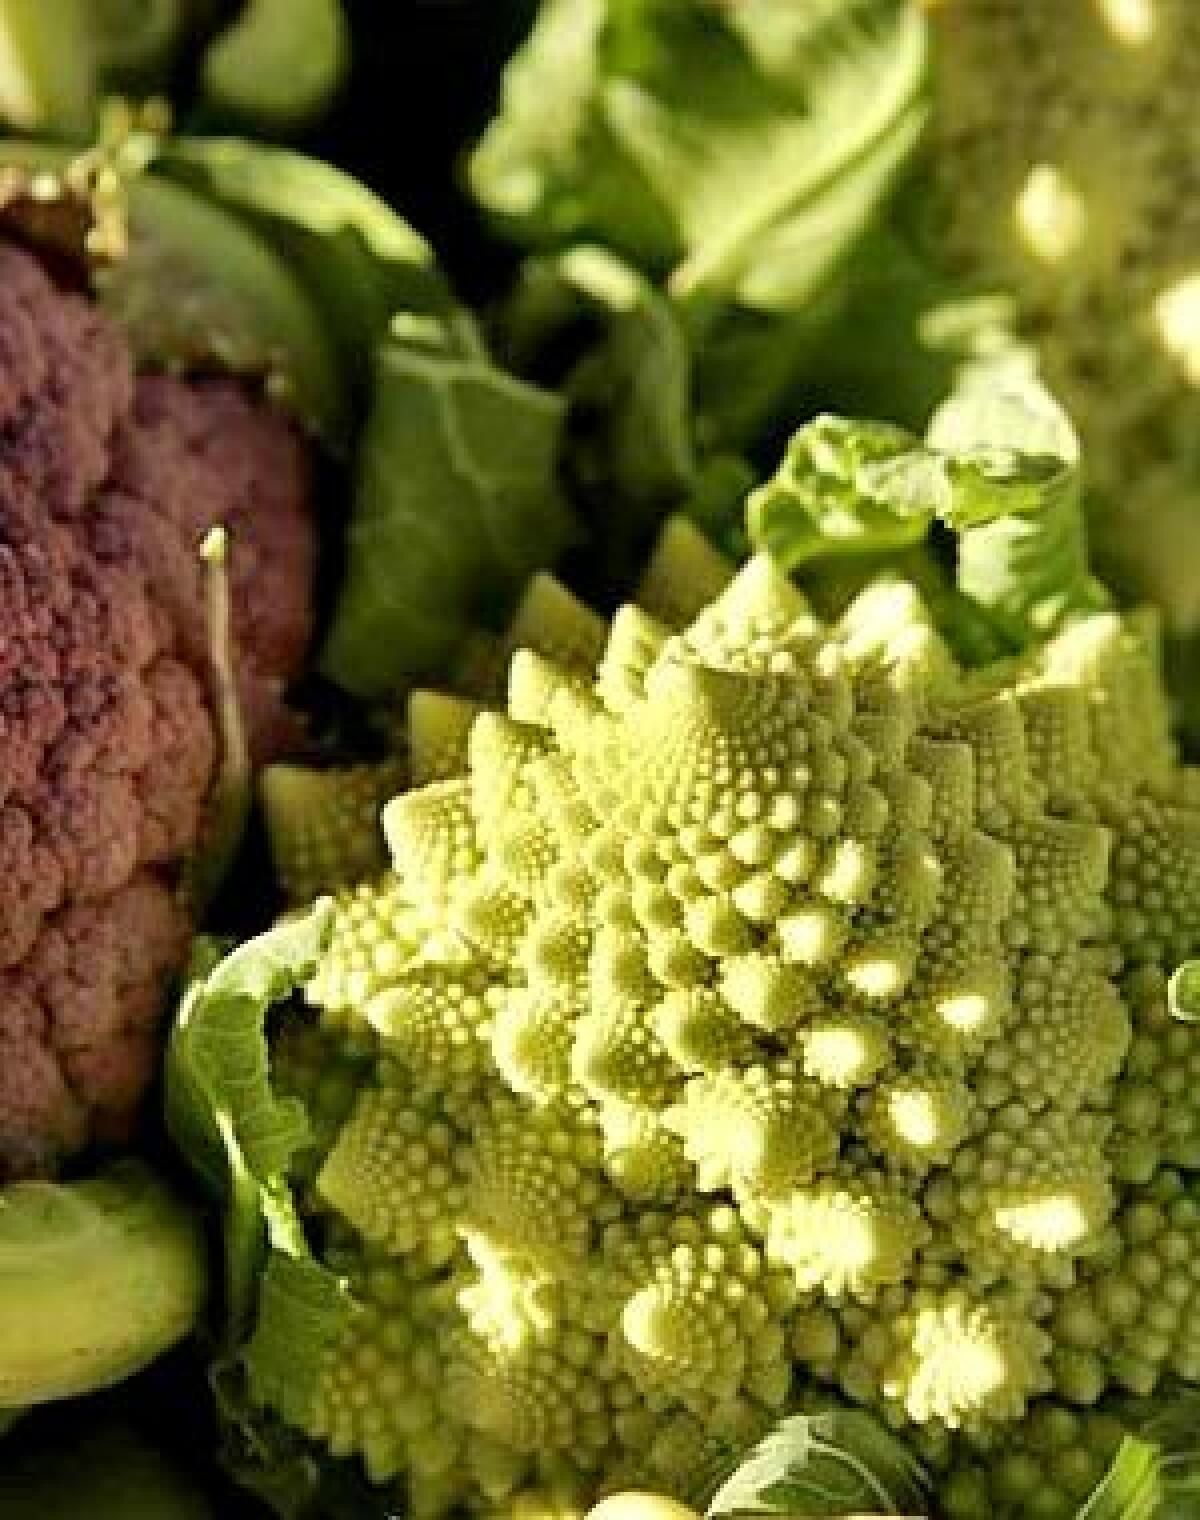 Today, cauliflower is a riot of color.